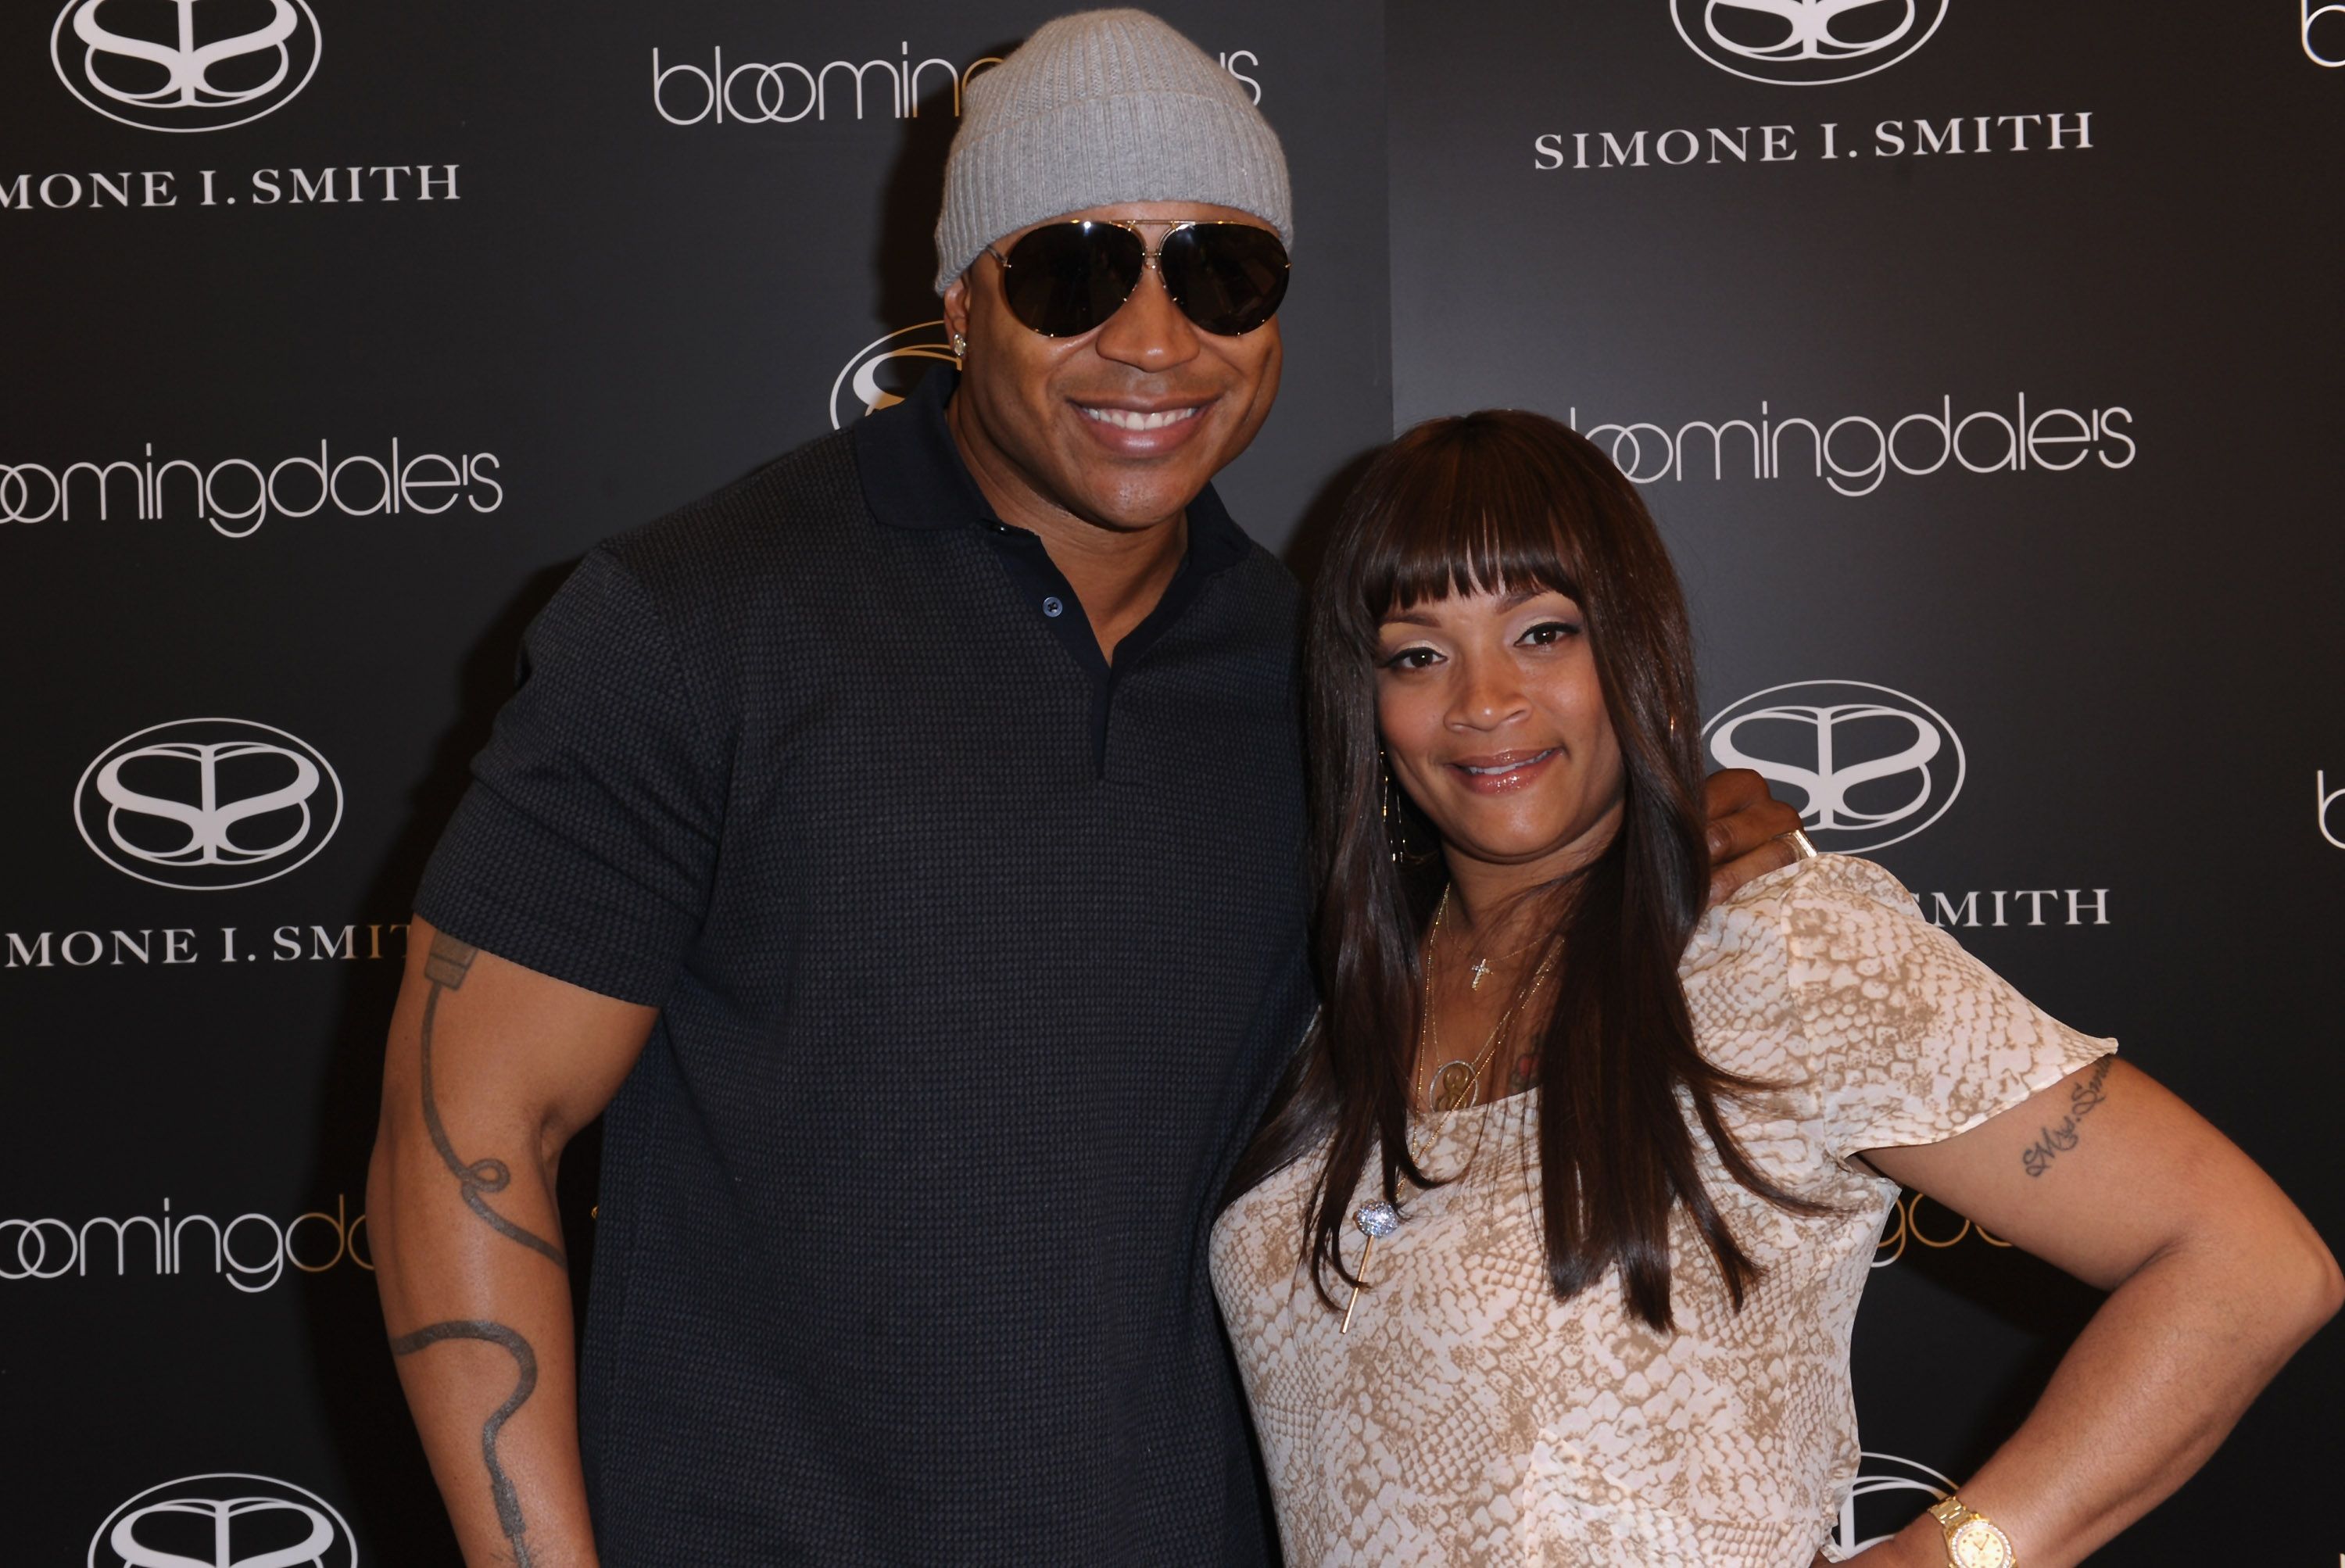 Actor LL Cool J joins his wife Simone I. Smith for her personal appearance at Bloomingdale's on May 12, 2011. | Source: Getty Images